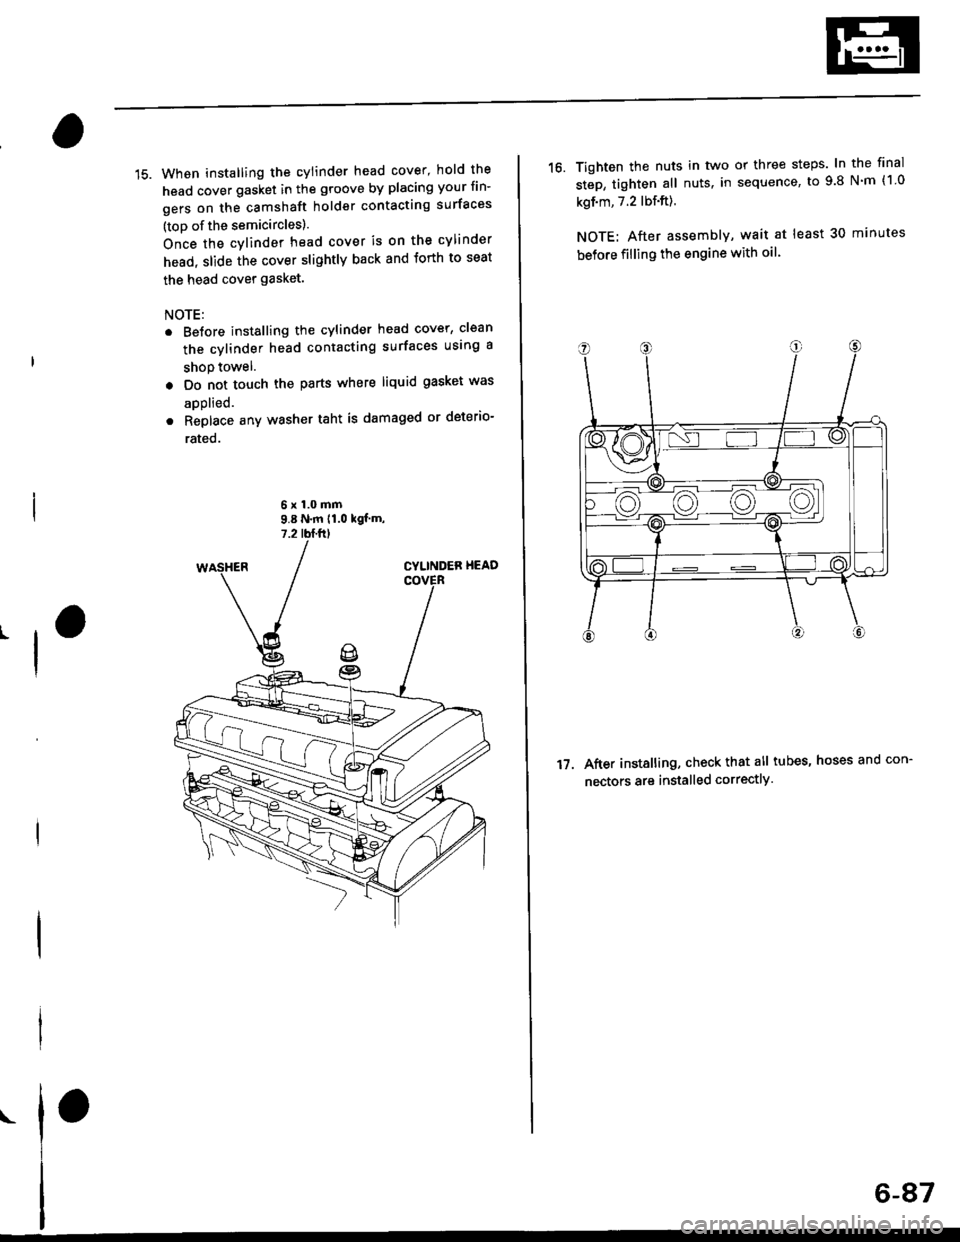 HONDA CIVIC 1999 6.G Workshop Manual 15. When installing the cylinder head cover, hold the
head cover gasket in the groove by placing your fin-
gers on the camshaft holder contacting surfaces
(toD of the semicircles).
Once the cylinder h